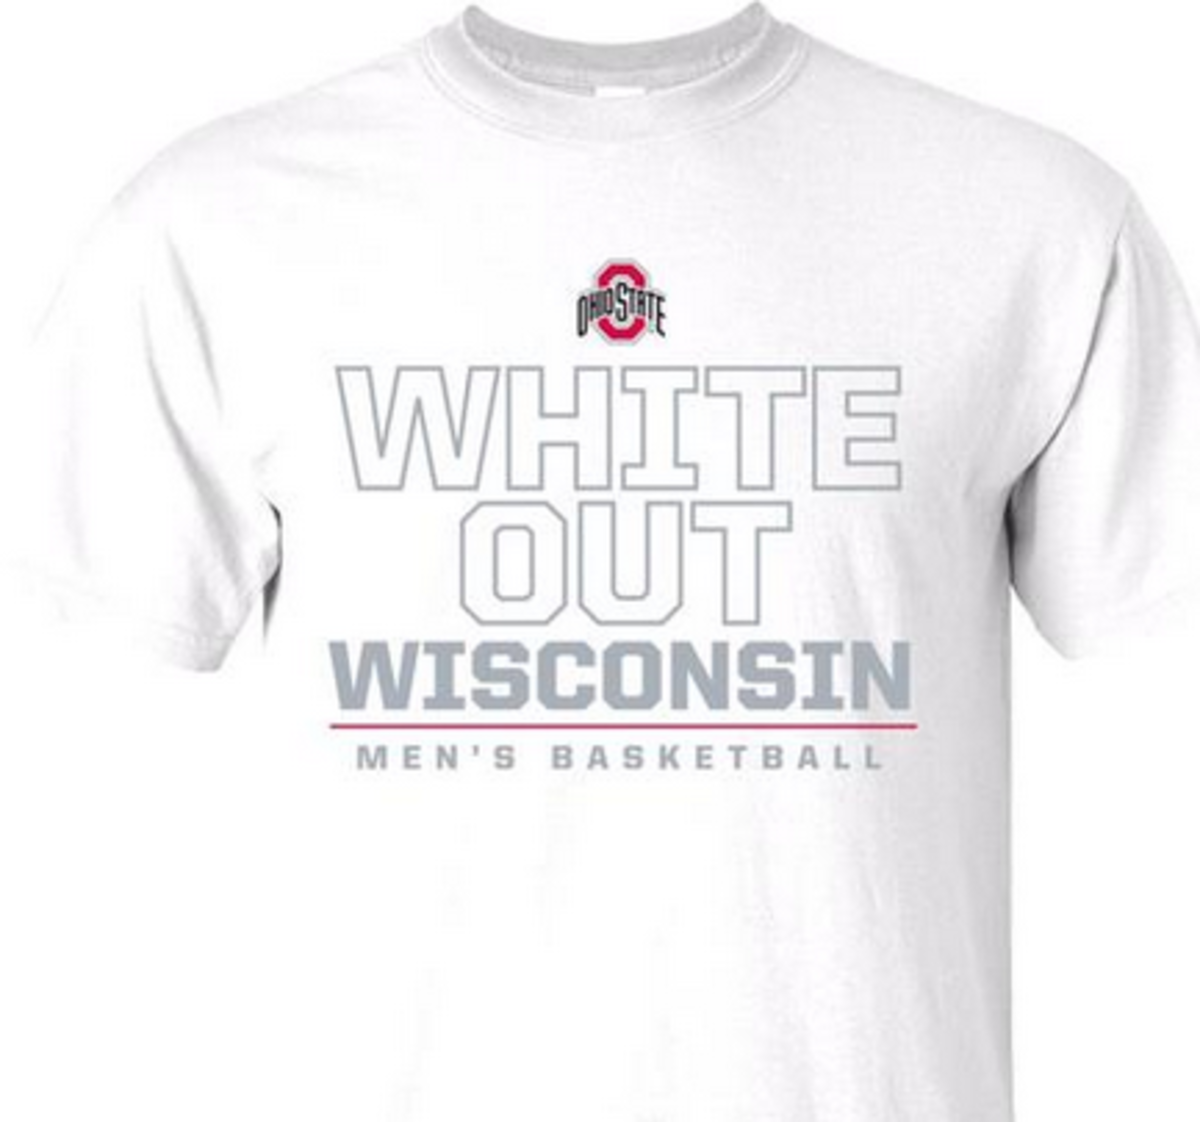 T-shirt calls for white out of Ohio State game against Wisconsin.